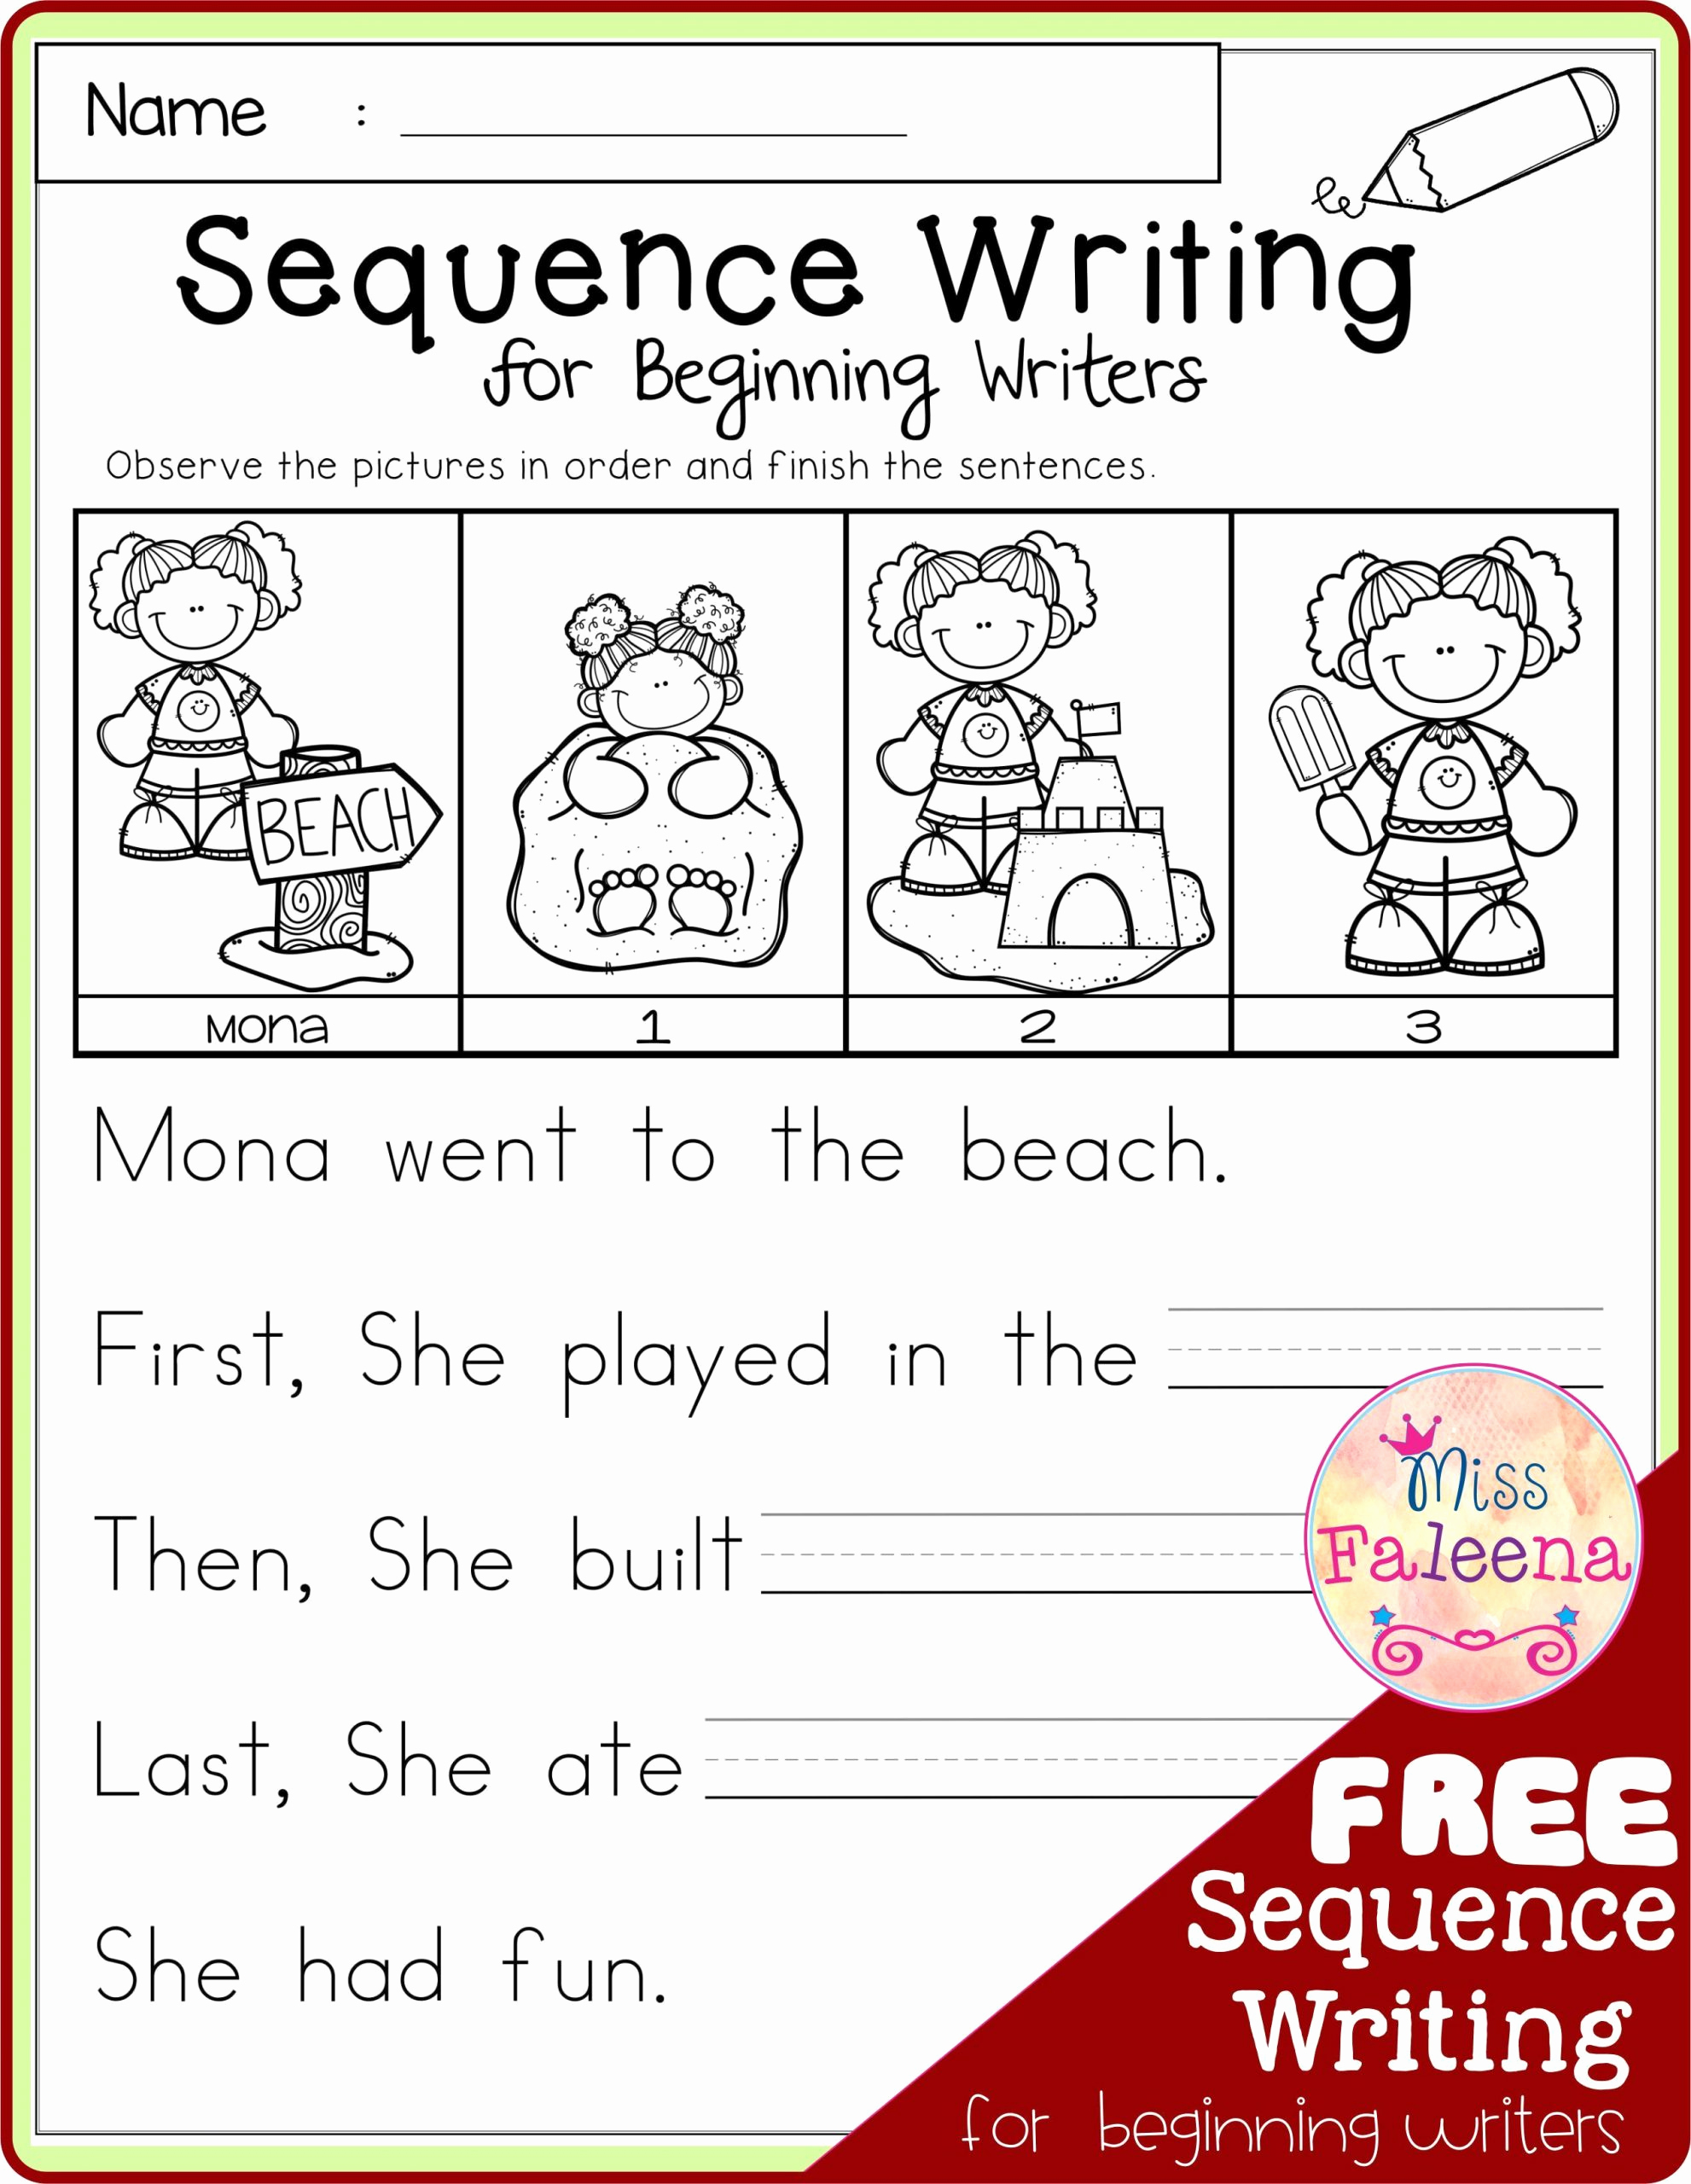 Sequence Worksheets 3rd Grade Lovely 20 Sequence Worksheets 3rd Grade